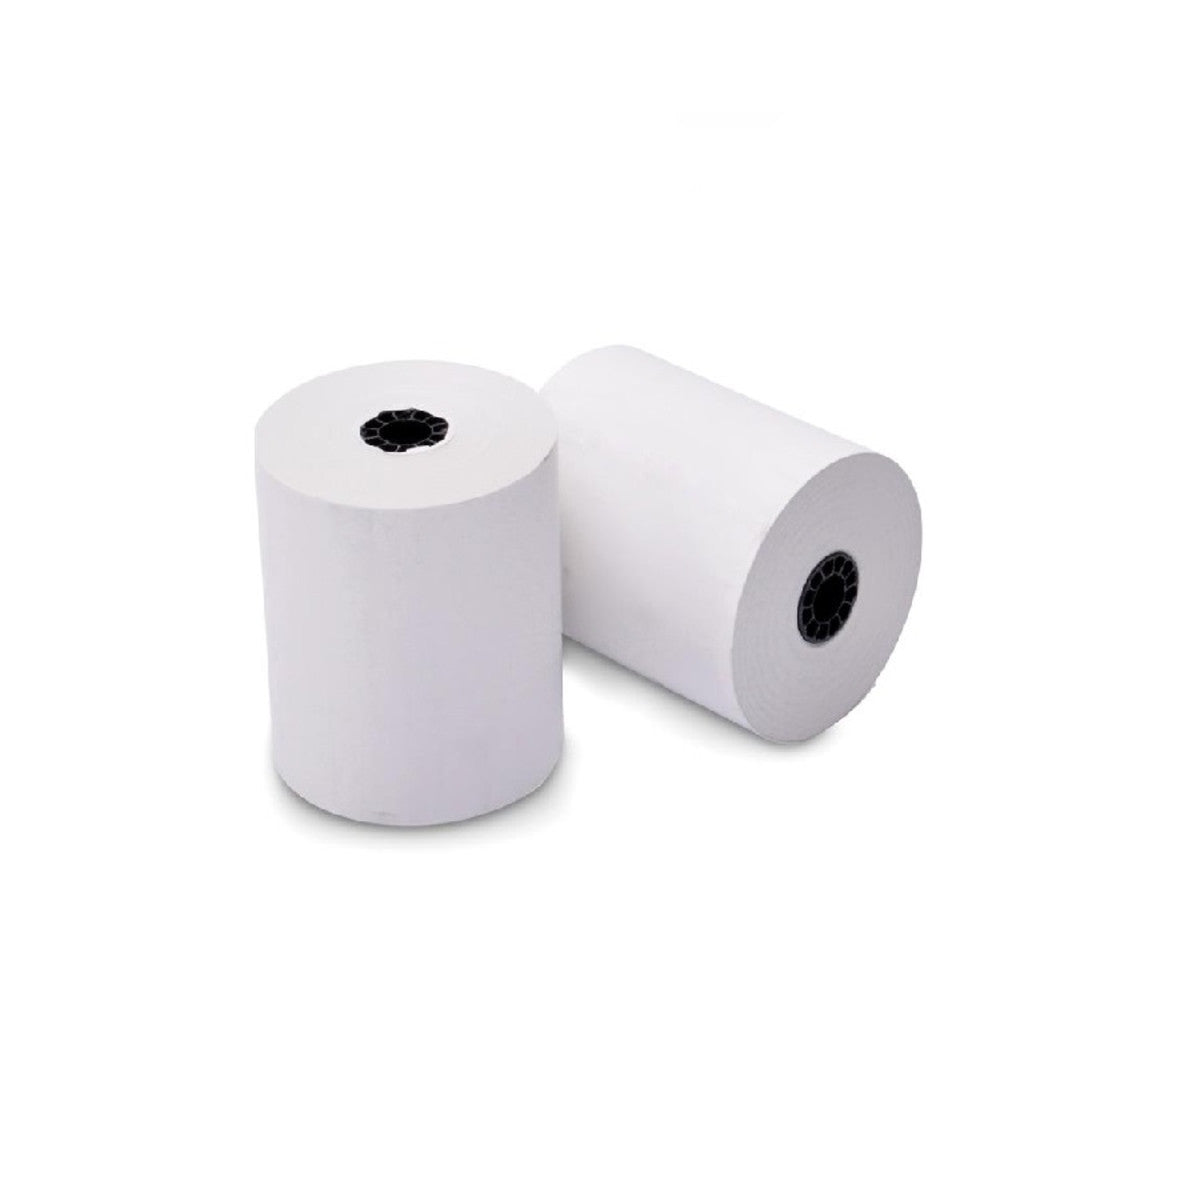 High-quality Flight Dental thermal printer paper, 2.25 inches by 1 1/8 inches, 100 sheets per pack, for accurate sterilization records.